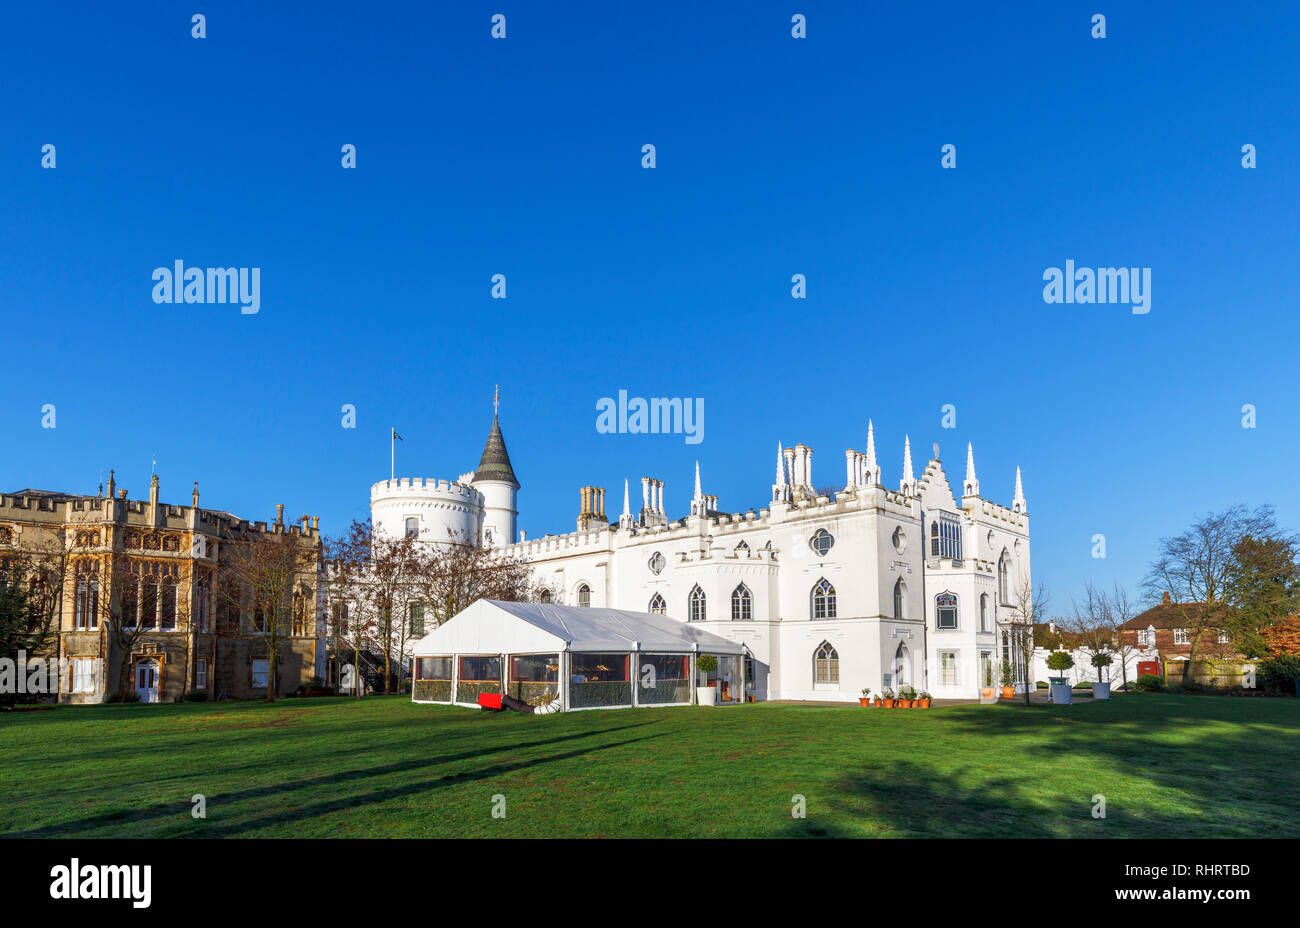 White walls of Strawberry Hill House, a Gothic Revival villa built in Twickenham, London by Horace Walpole from 1749, on a sunny day with blue sky Stock Photo